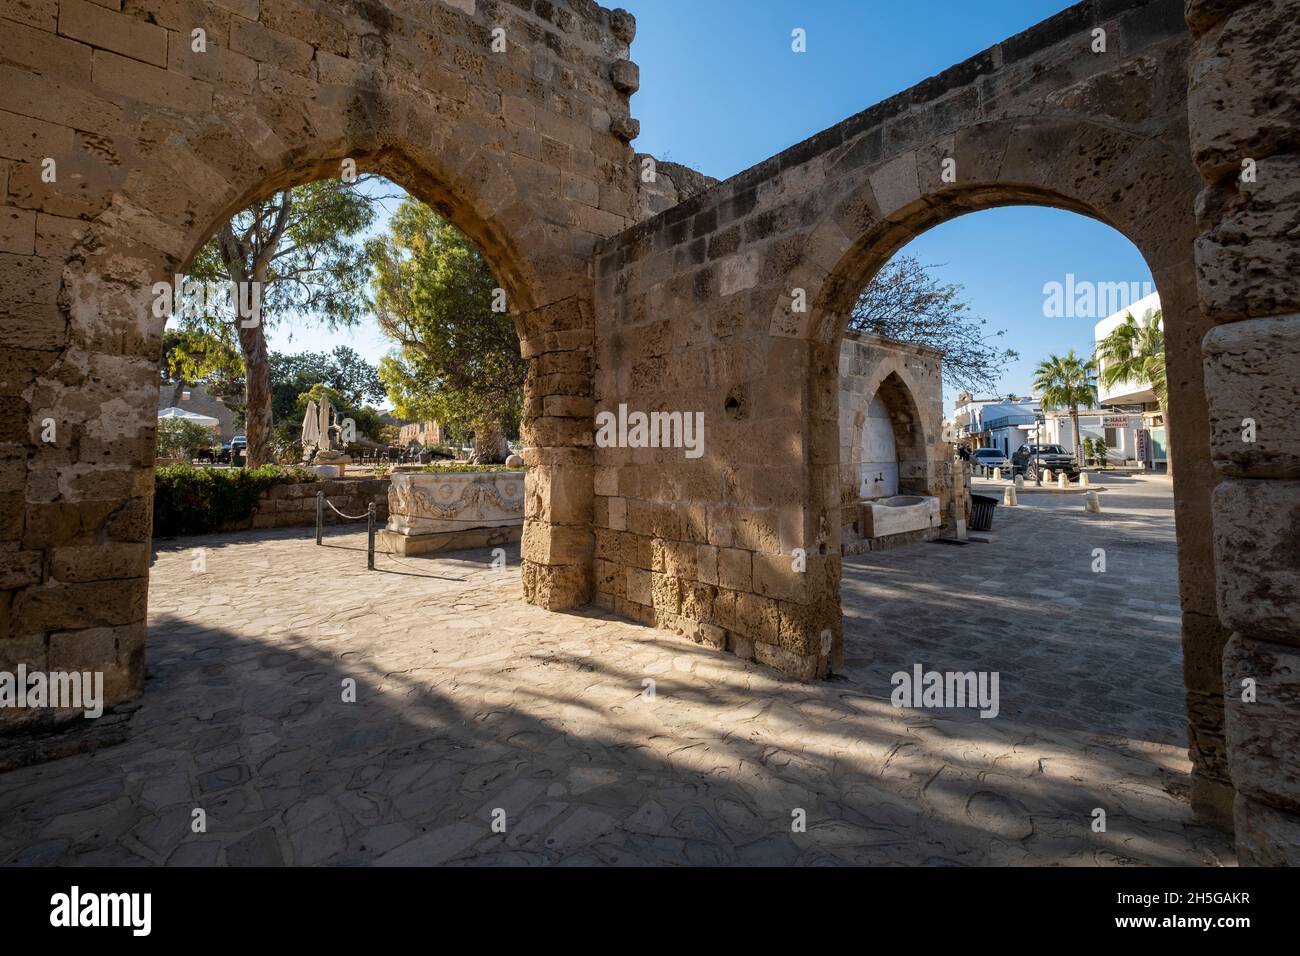 The arched entrance to Venetian Palace, Famagusta, Cyprus. Stock Photo